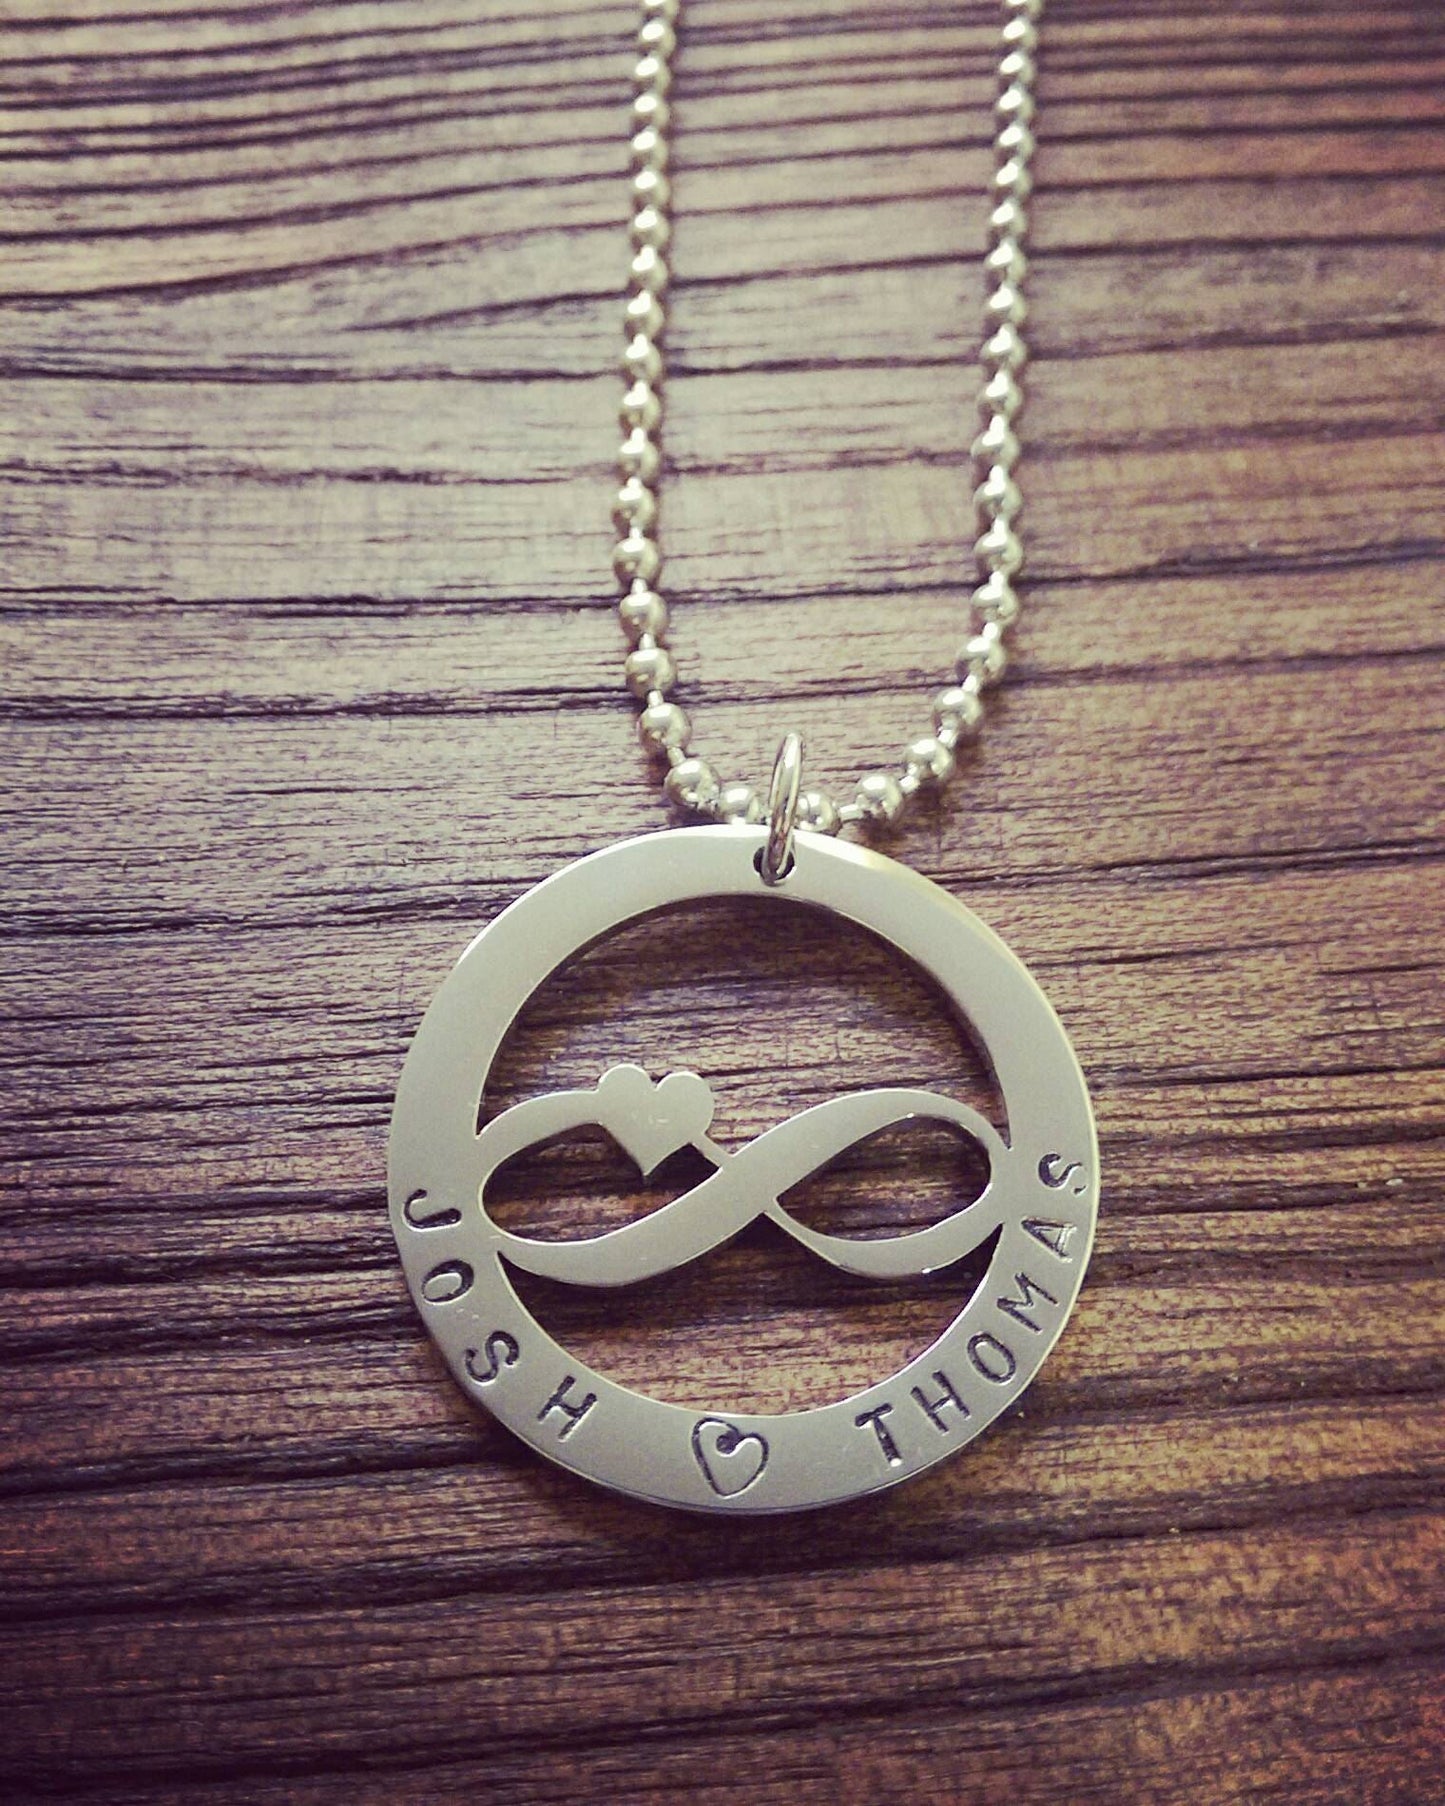 Personalised Necklace, Hand Stamped Necklace Design Pendant Stainless Steel. Choose your design and colour and Chain Length